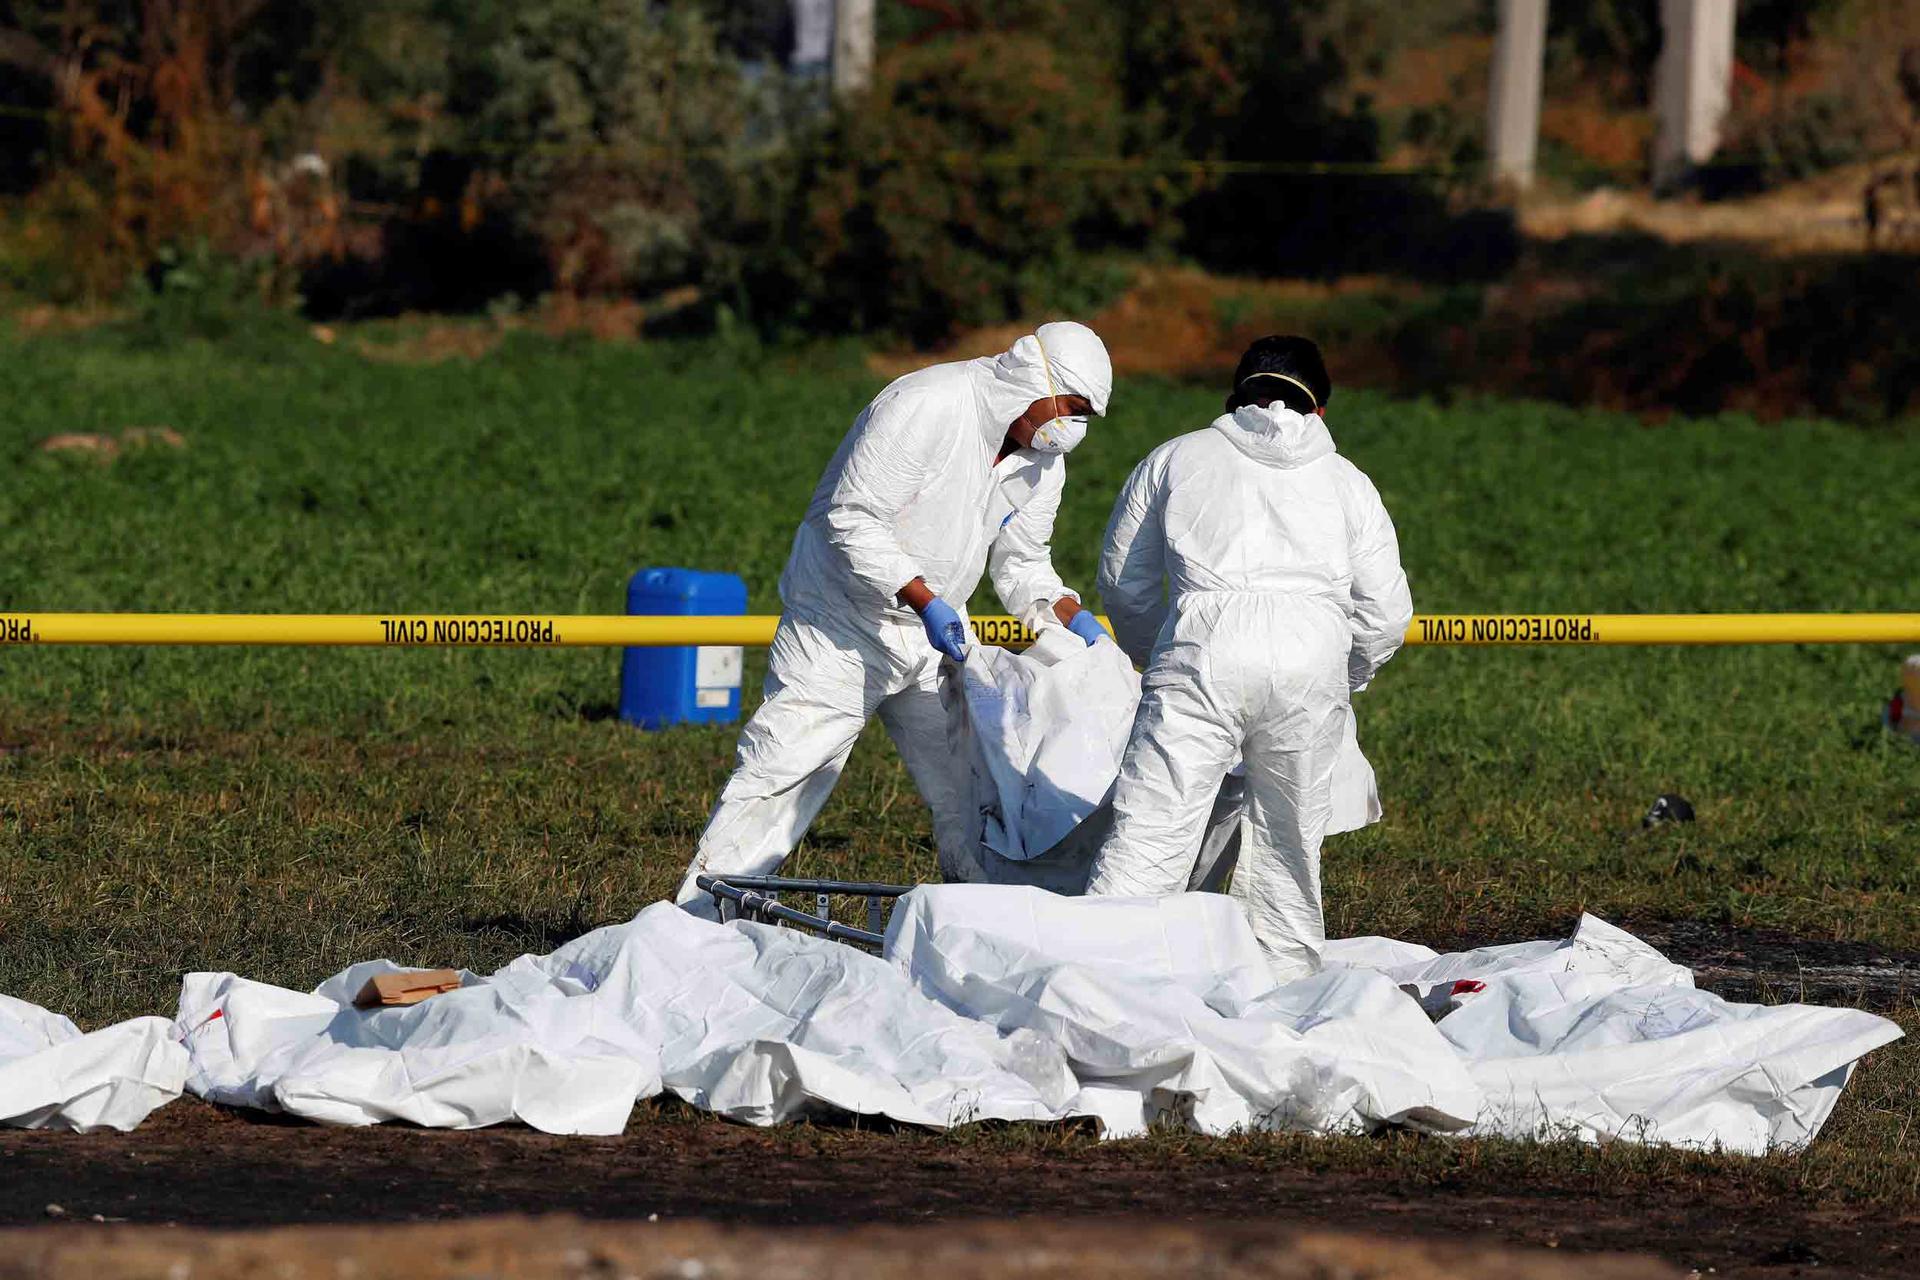 Men in white suits arrange bodies in white bags behind a yellow tape line